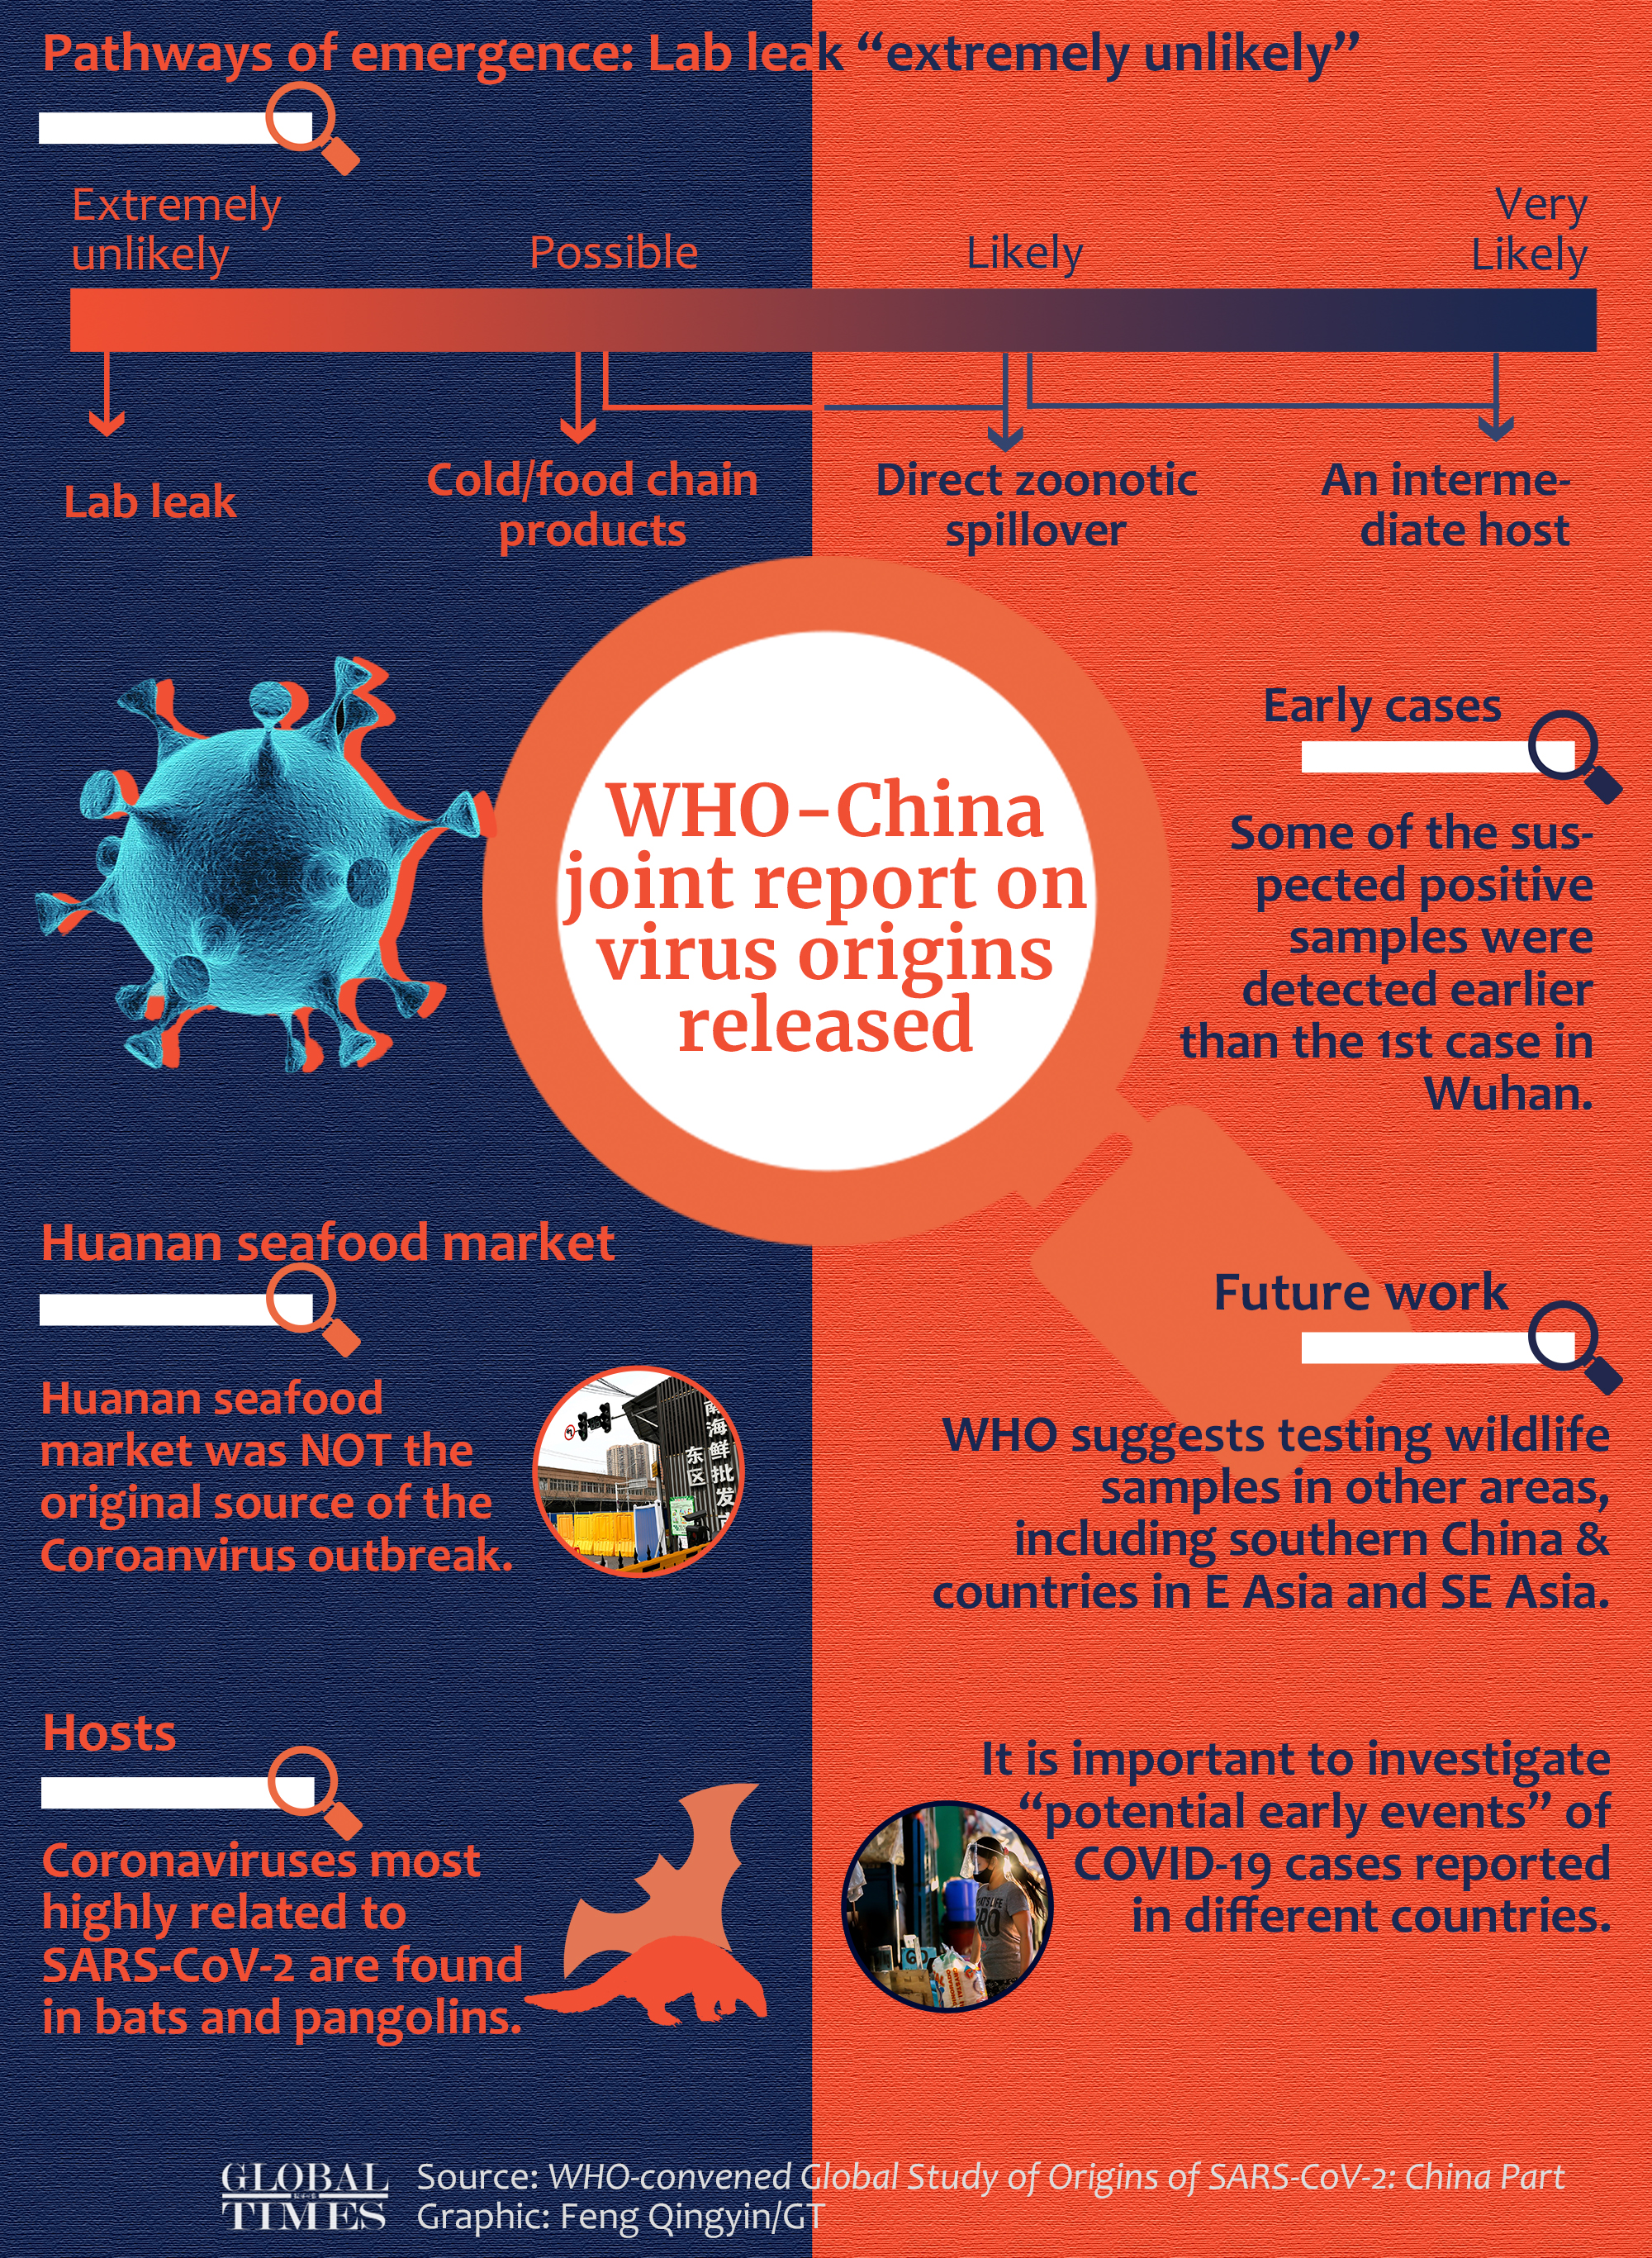 Highlights from #WHO-China joint report on coronavirus origins:
-A lab leak was extremely unlikely
-Huanan seafood market was NOT the original source of the outbreak
-It's important to investigate 